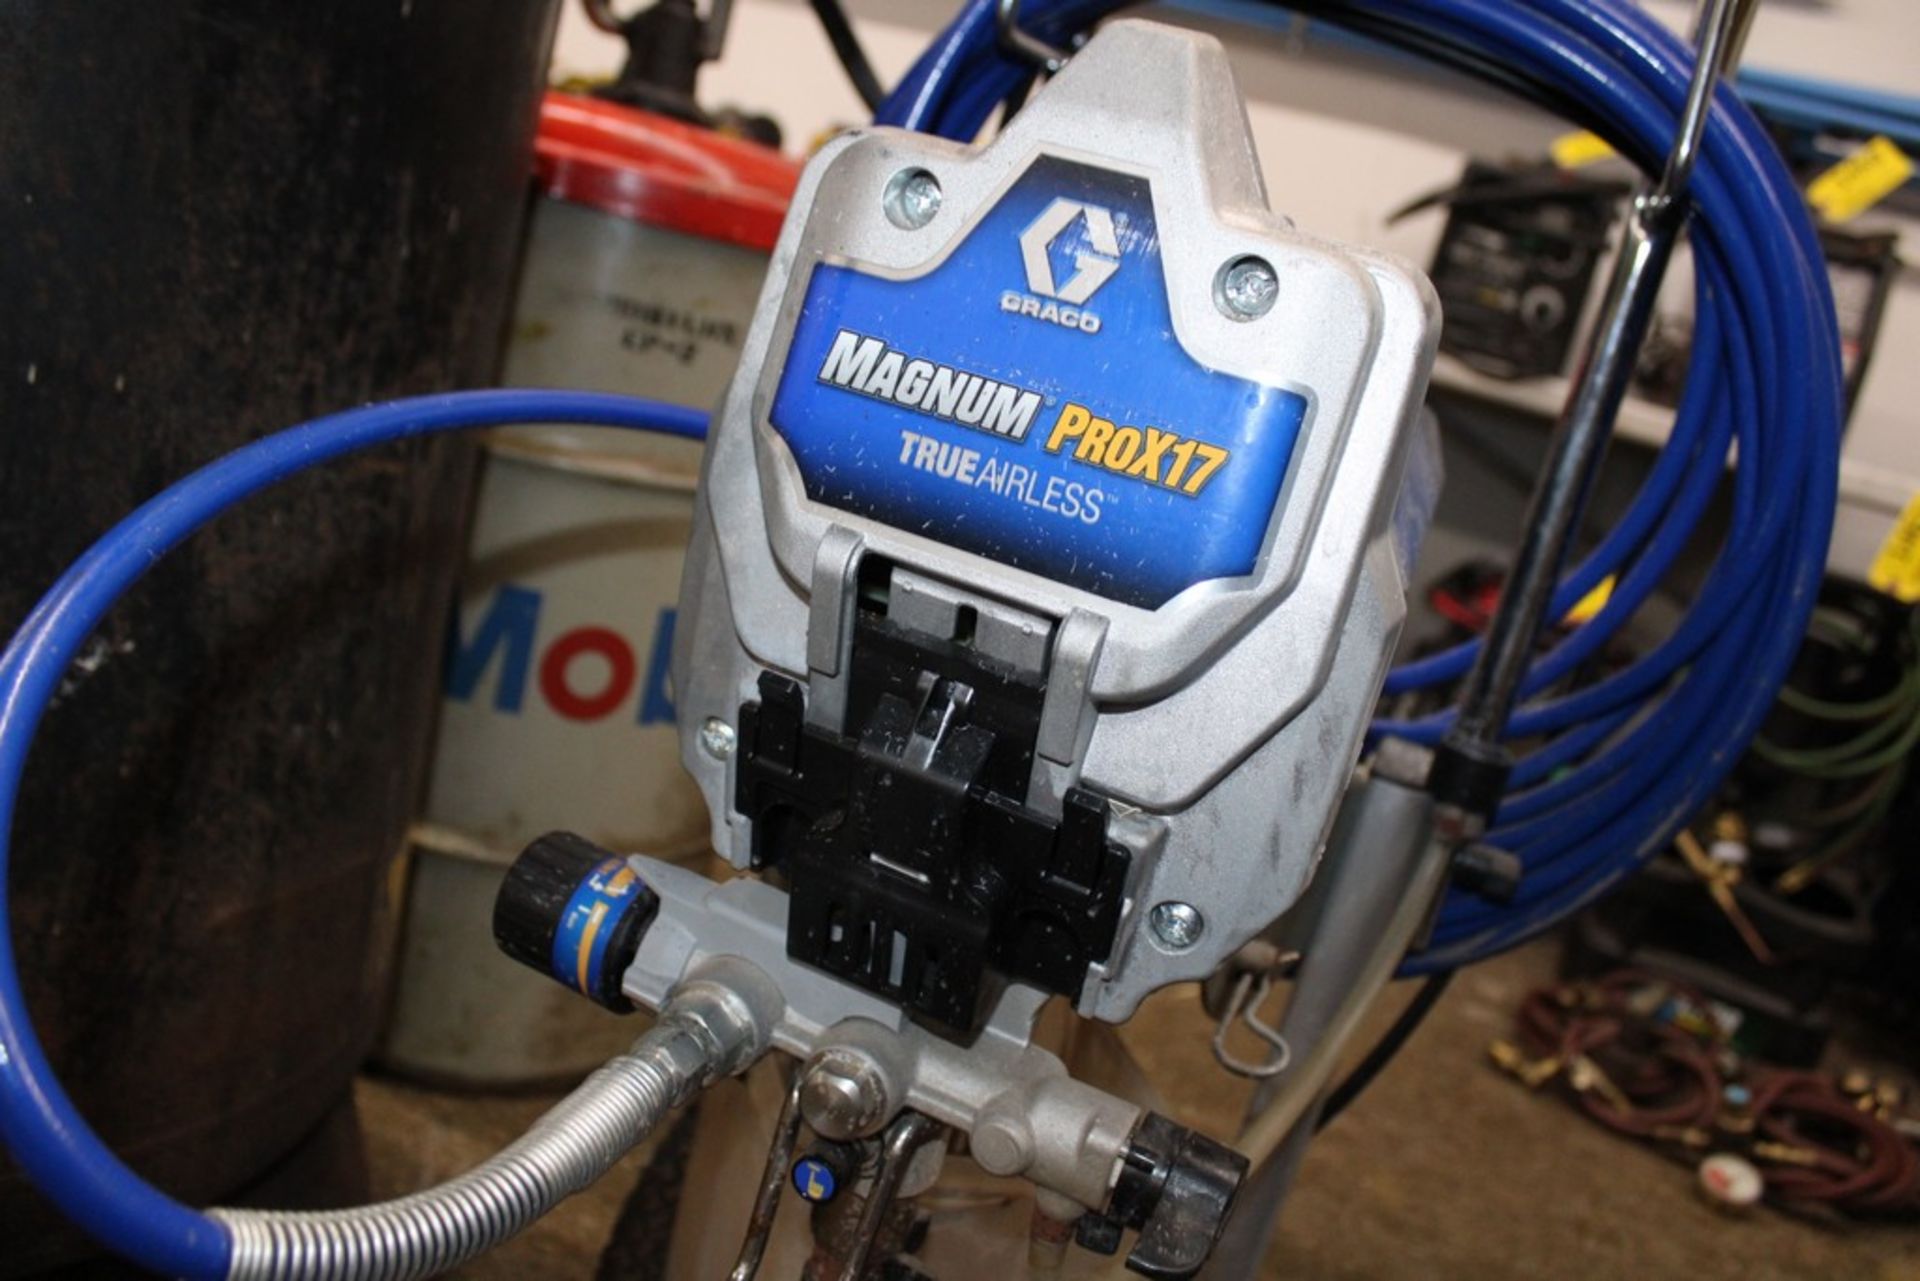 GRACO PROX17 MAGNUM AIRLESS PAINT SPRAYER - Image 2 of 2